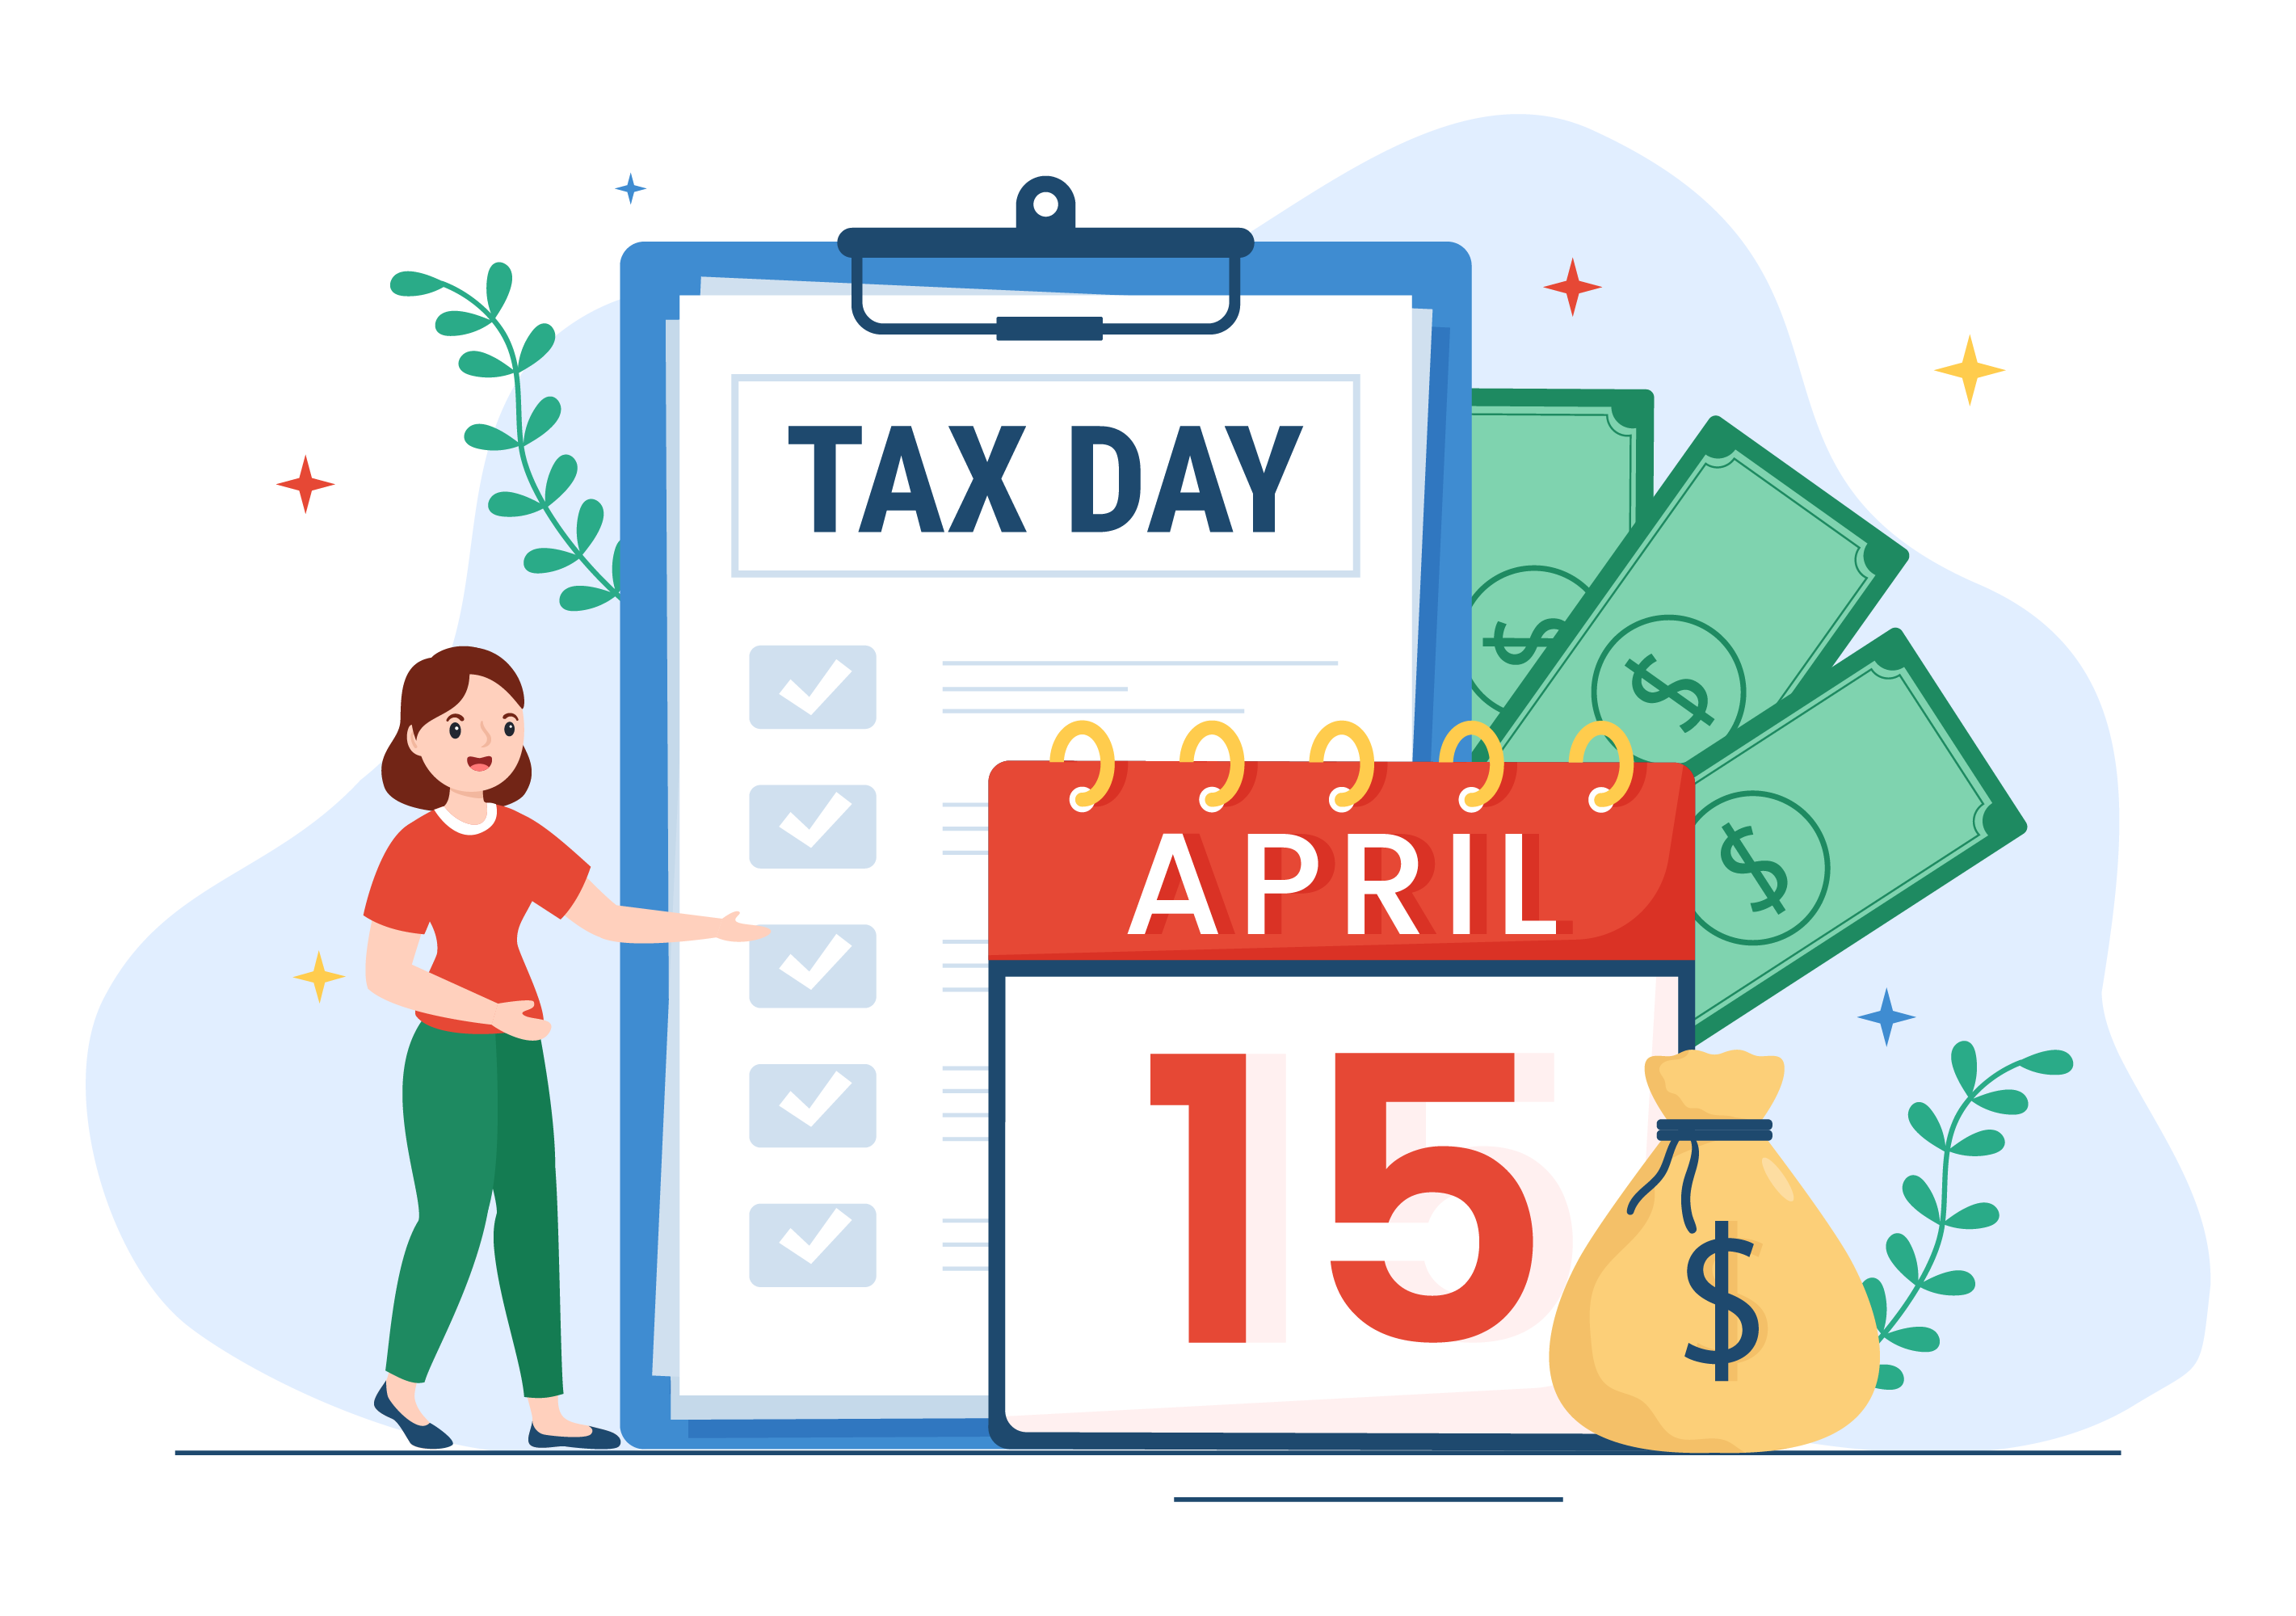 Premium Tax Day Illustration pack from Business Illustrations